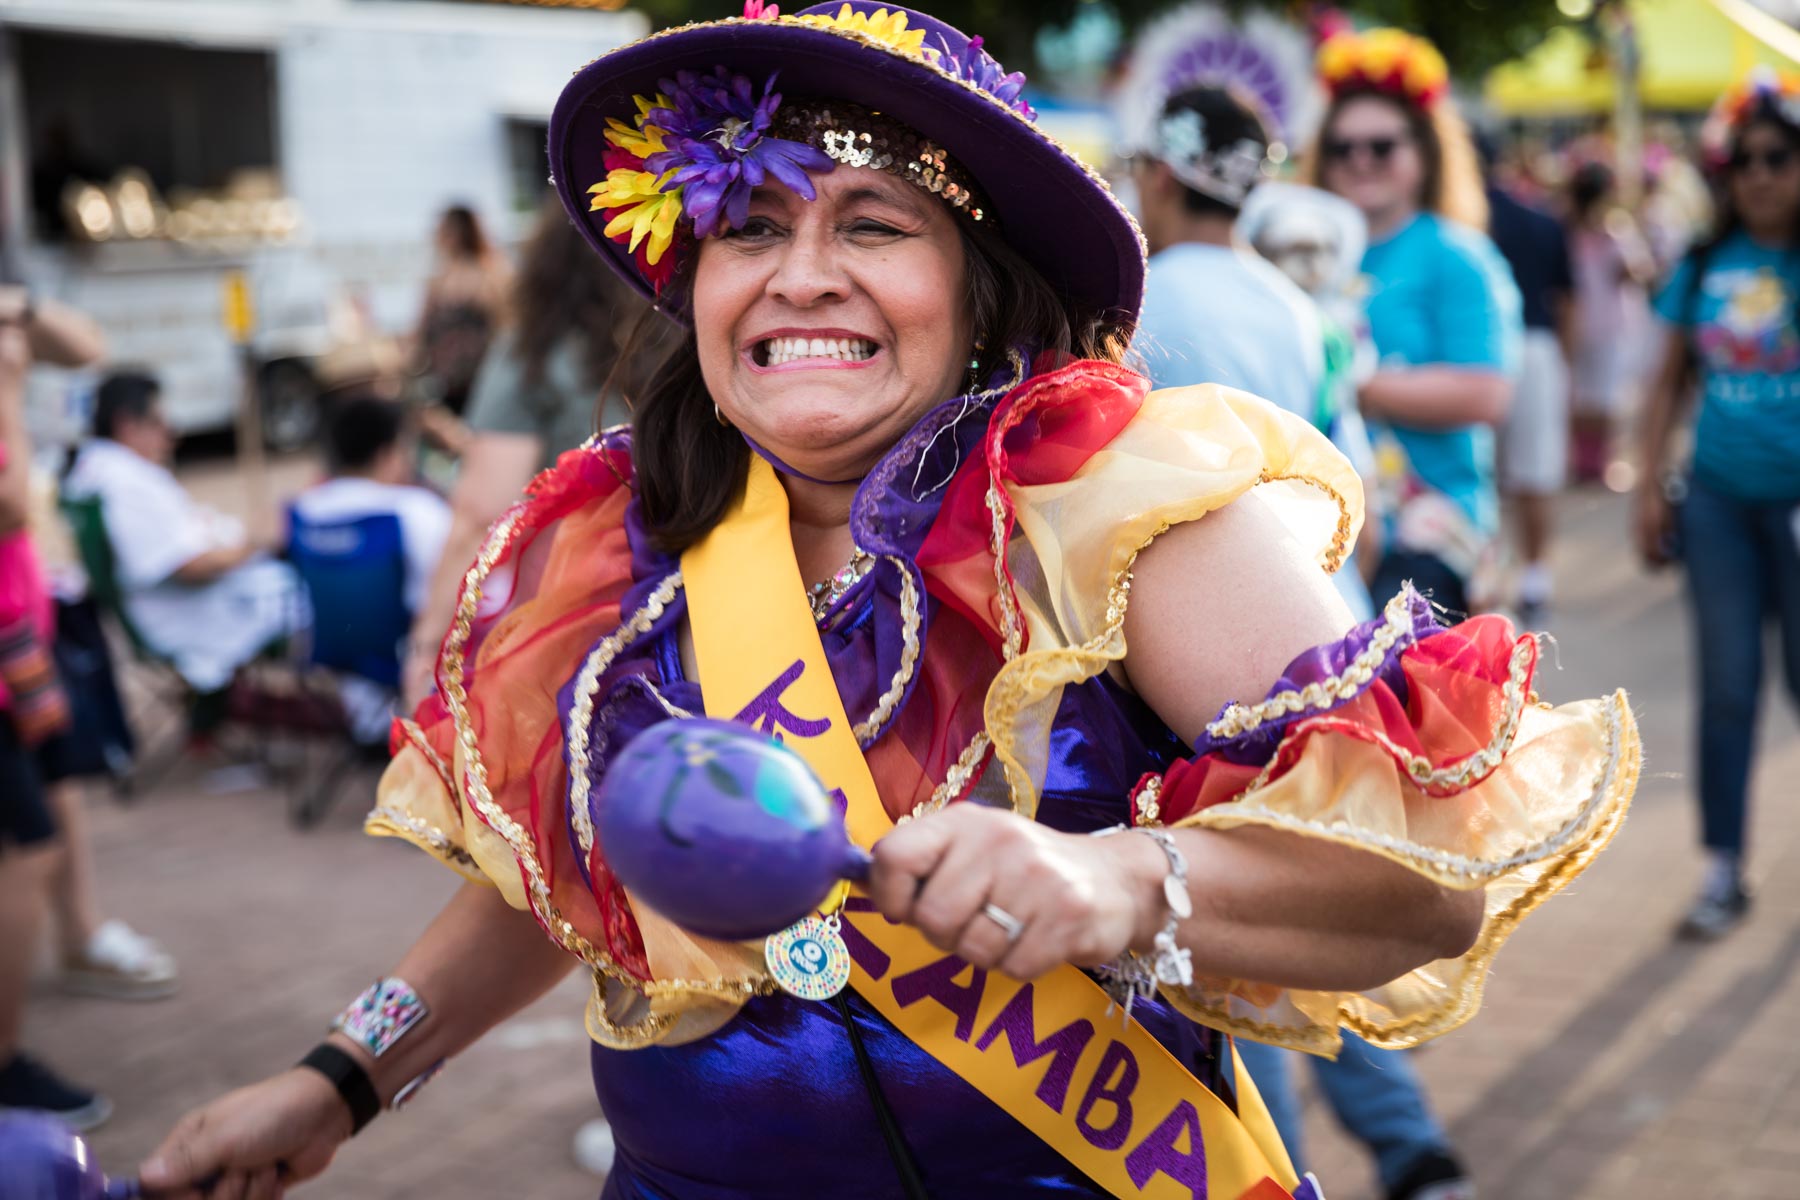 Female dancer wearing hat and shaking maracas during Fiesta Fiesta for an article on the best Fiesta photos